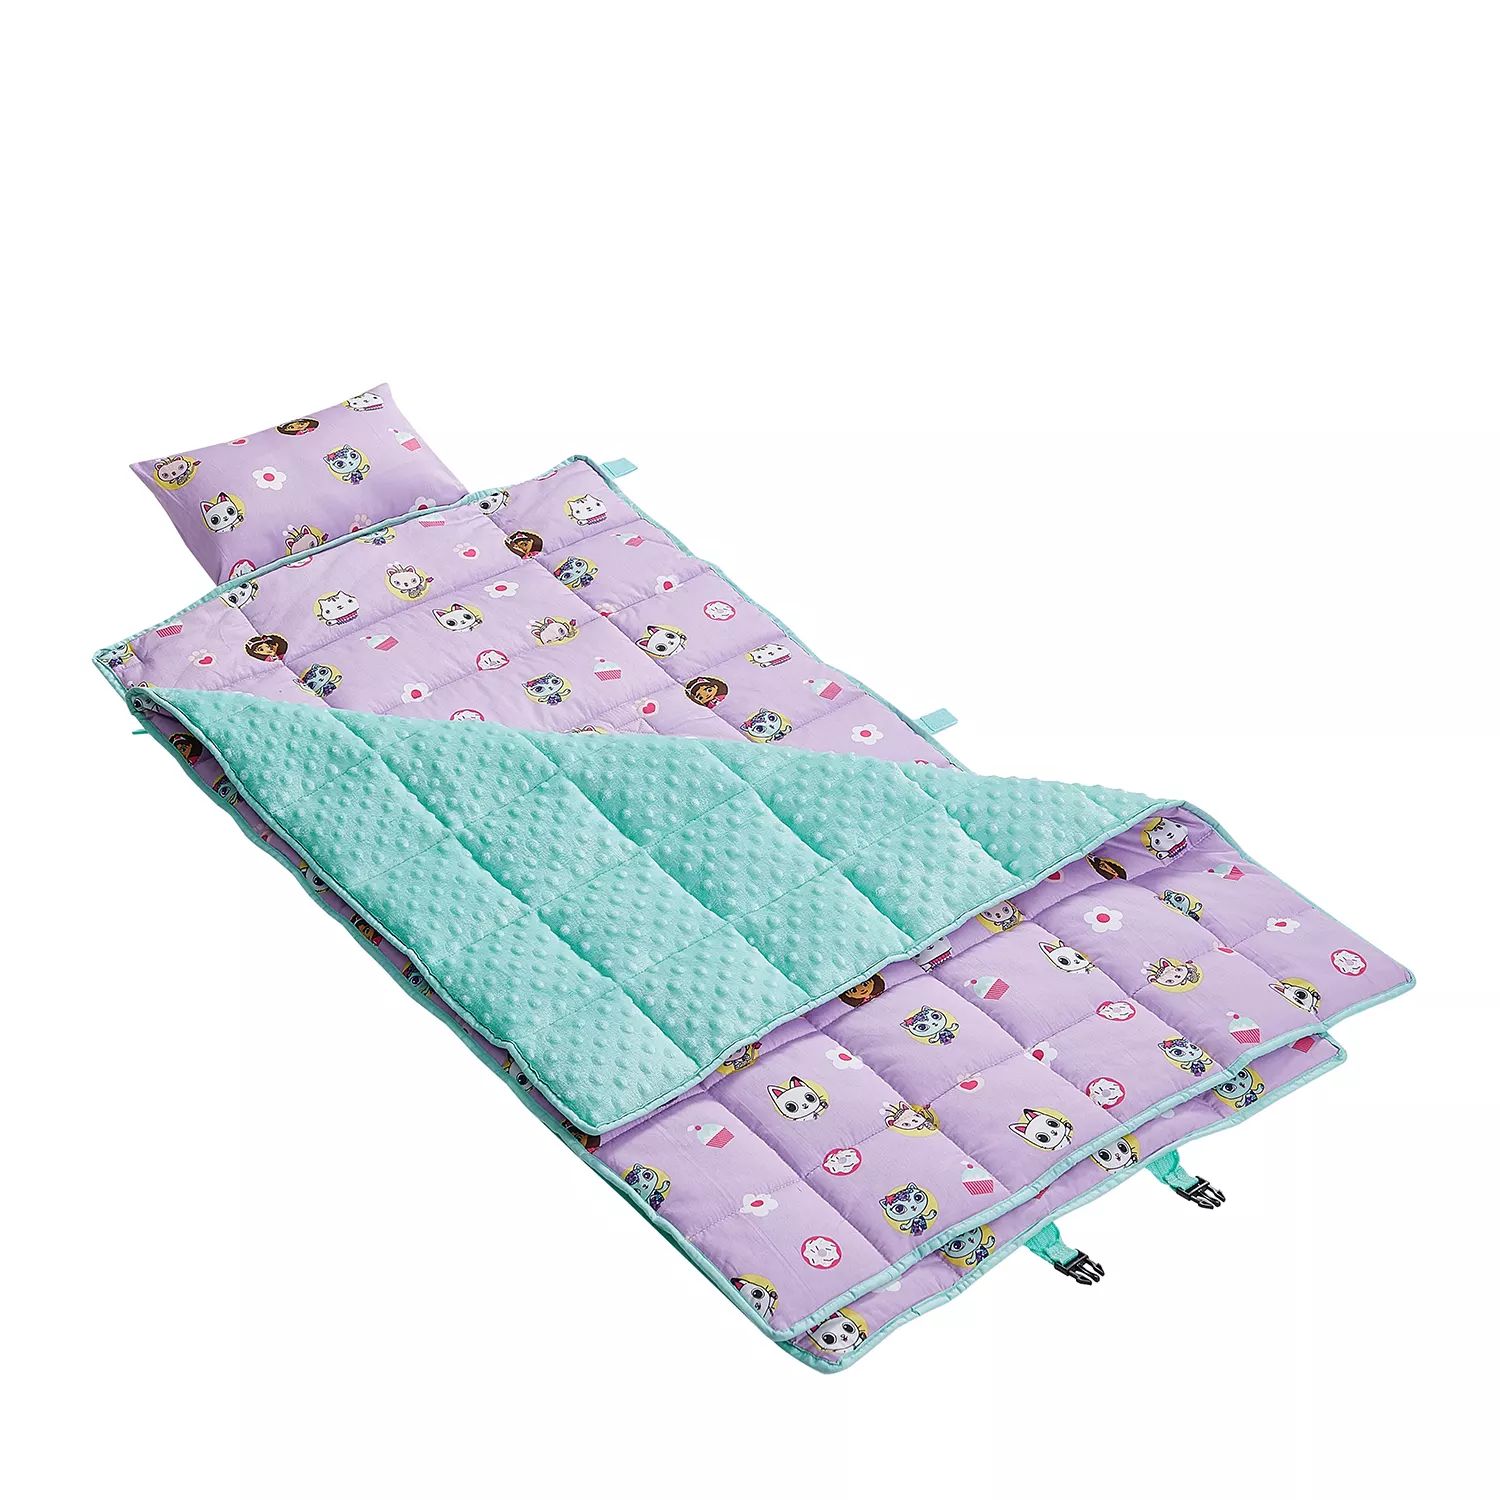 Gabby's Doll House Nap Mat With Removable Blanket | Sam's Club